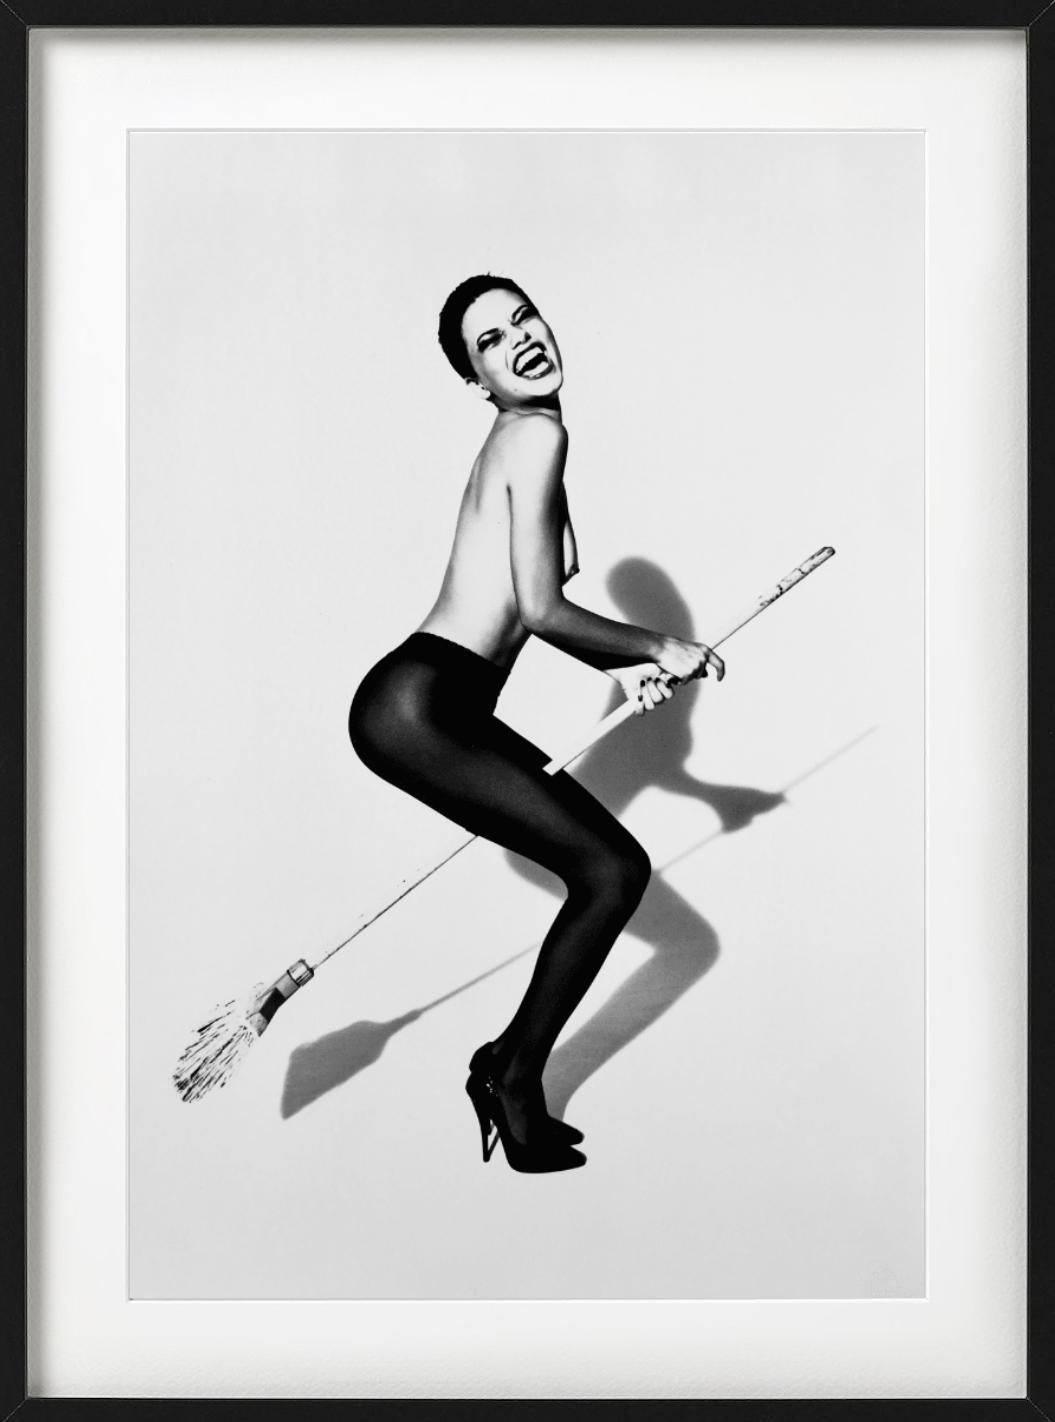 Other sizes and high end framing on request.

PREISS FINE ARTS is one of the world’s leading galleries for fine art photography representing the most famous contemporary artists.

Ellen von Unwerth is one of the most famous and influential